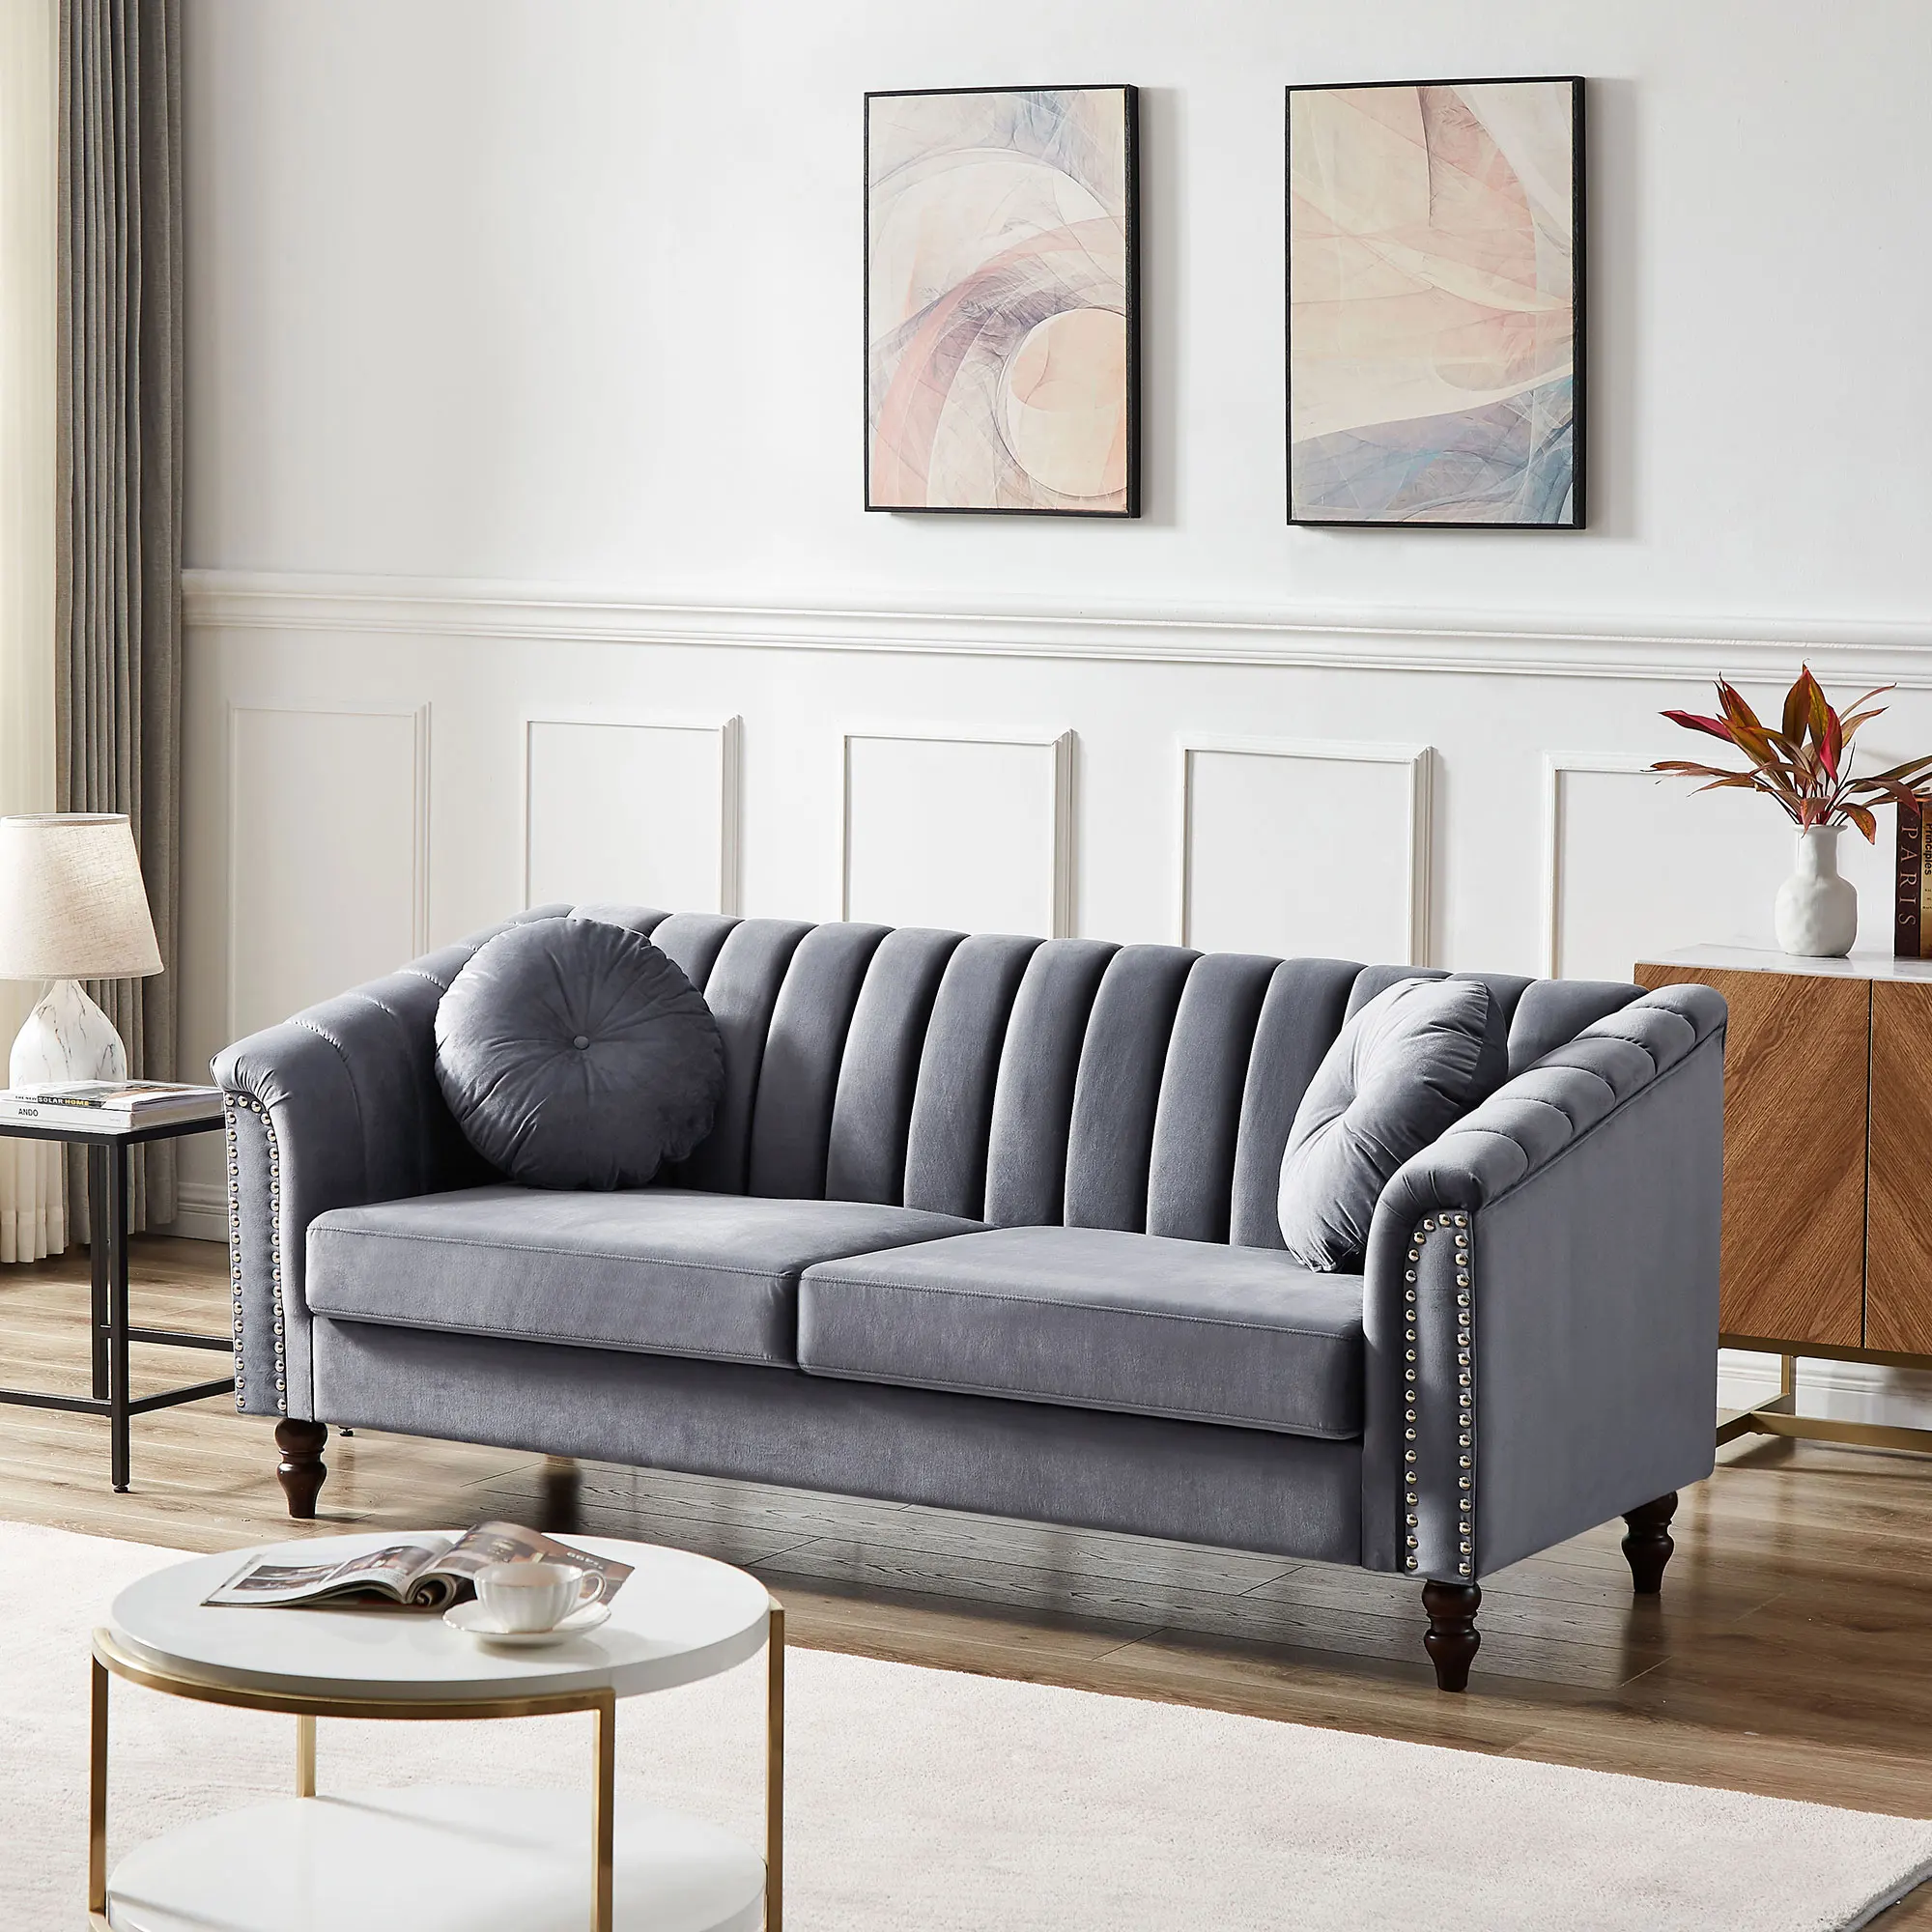 

Modern Velvet Upholstered Sofa Couch, 3 Seat Tufted Back with Nail Arms, Solid wood Legs, Sleeper Sofa for Living Room